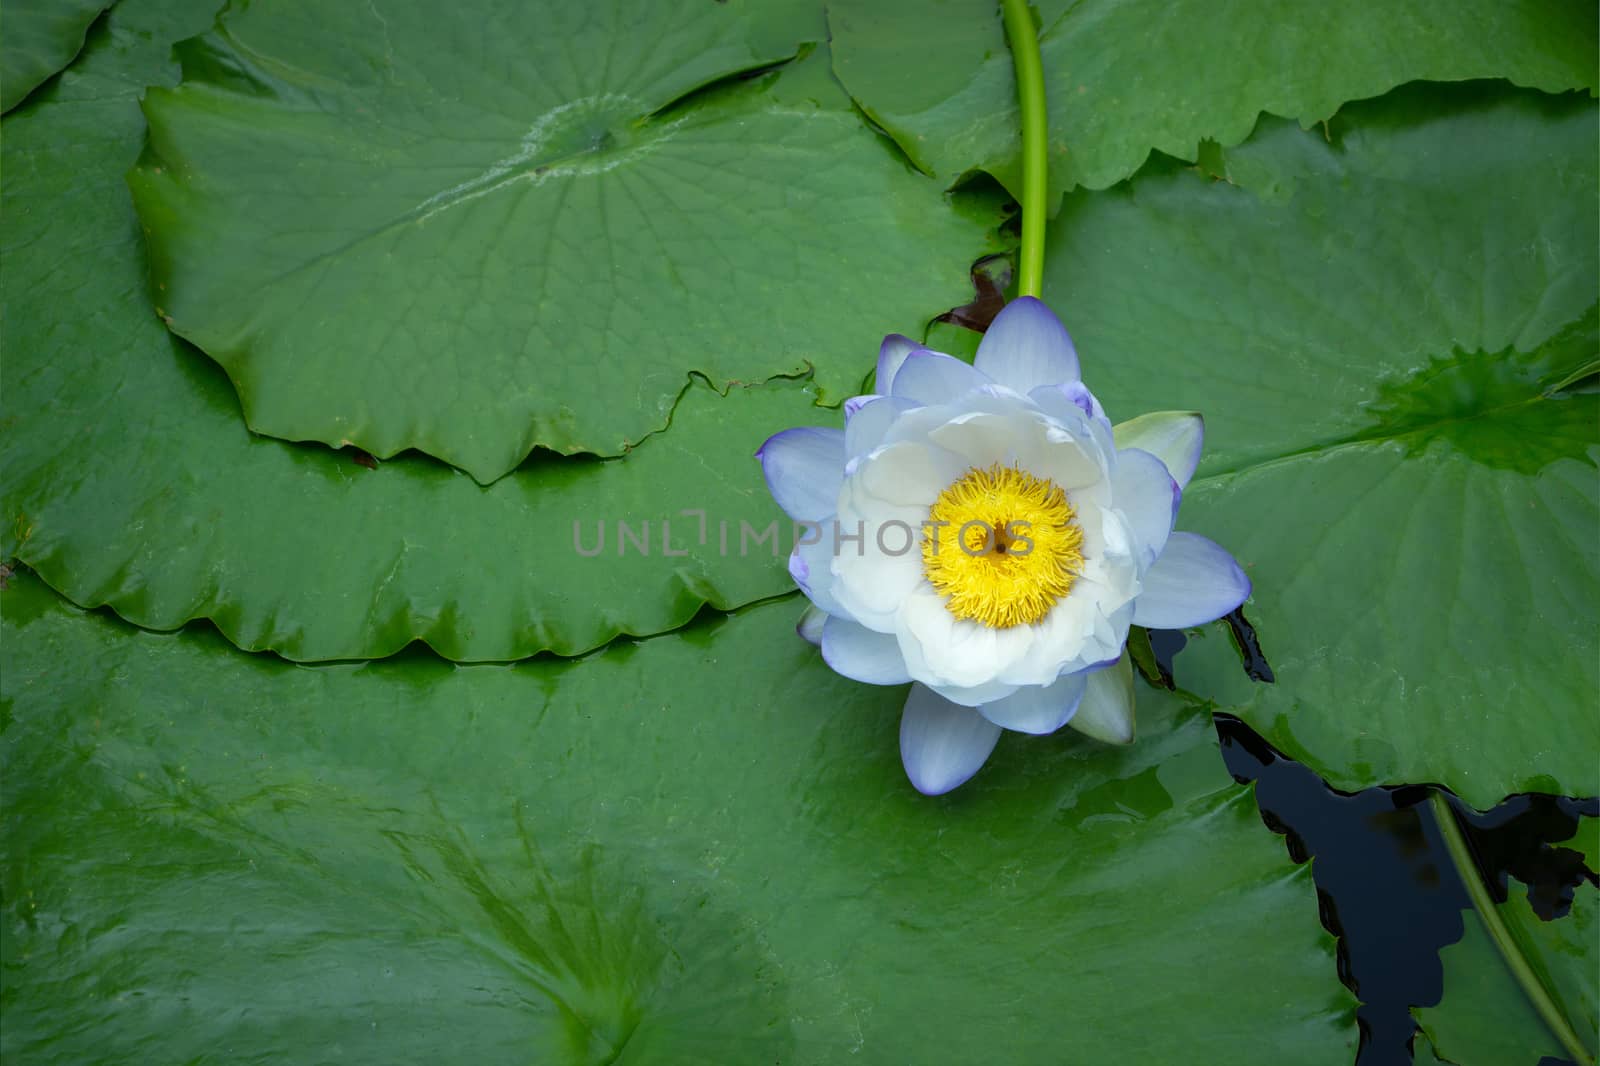 Violet and white thai water lily or lotus flower by pkproject